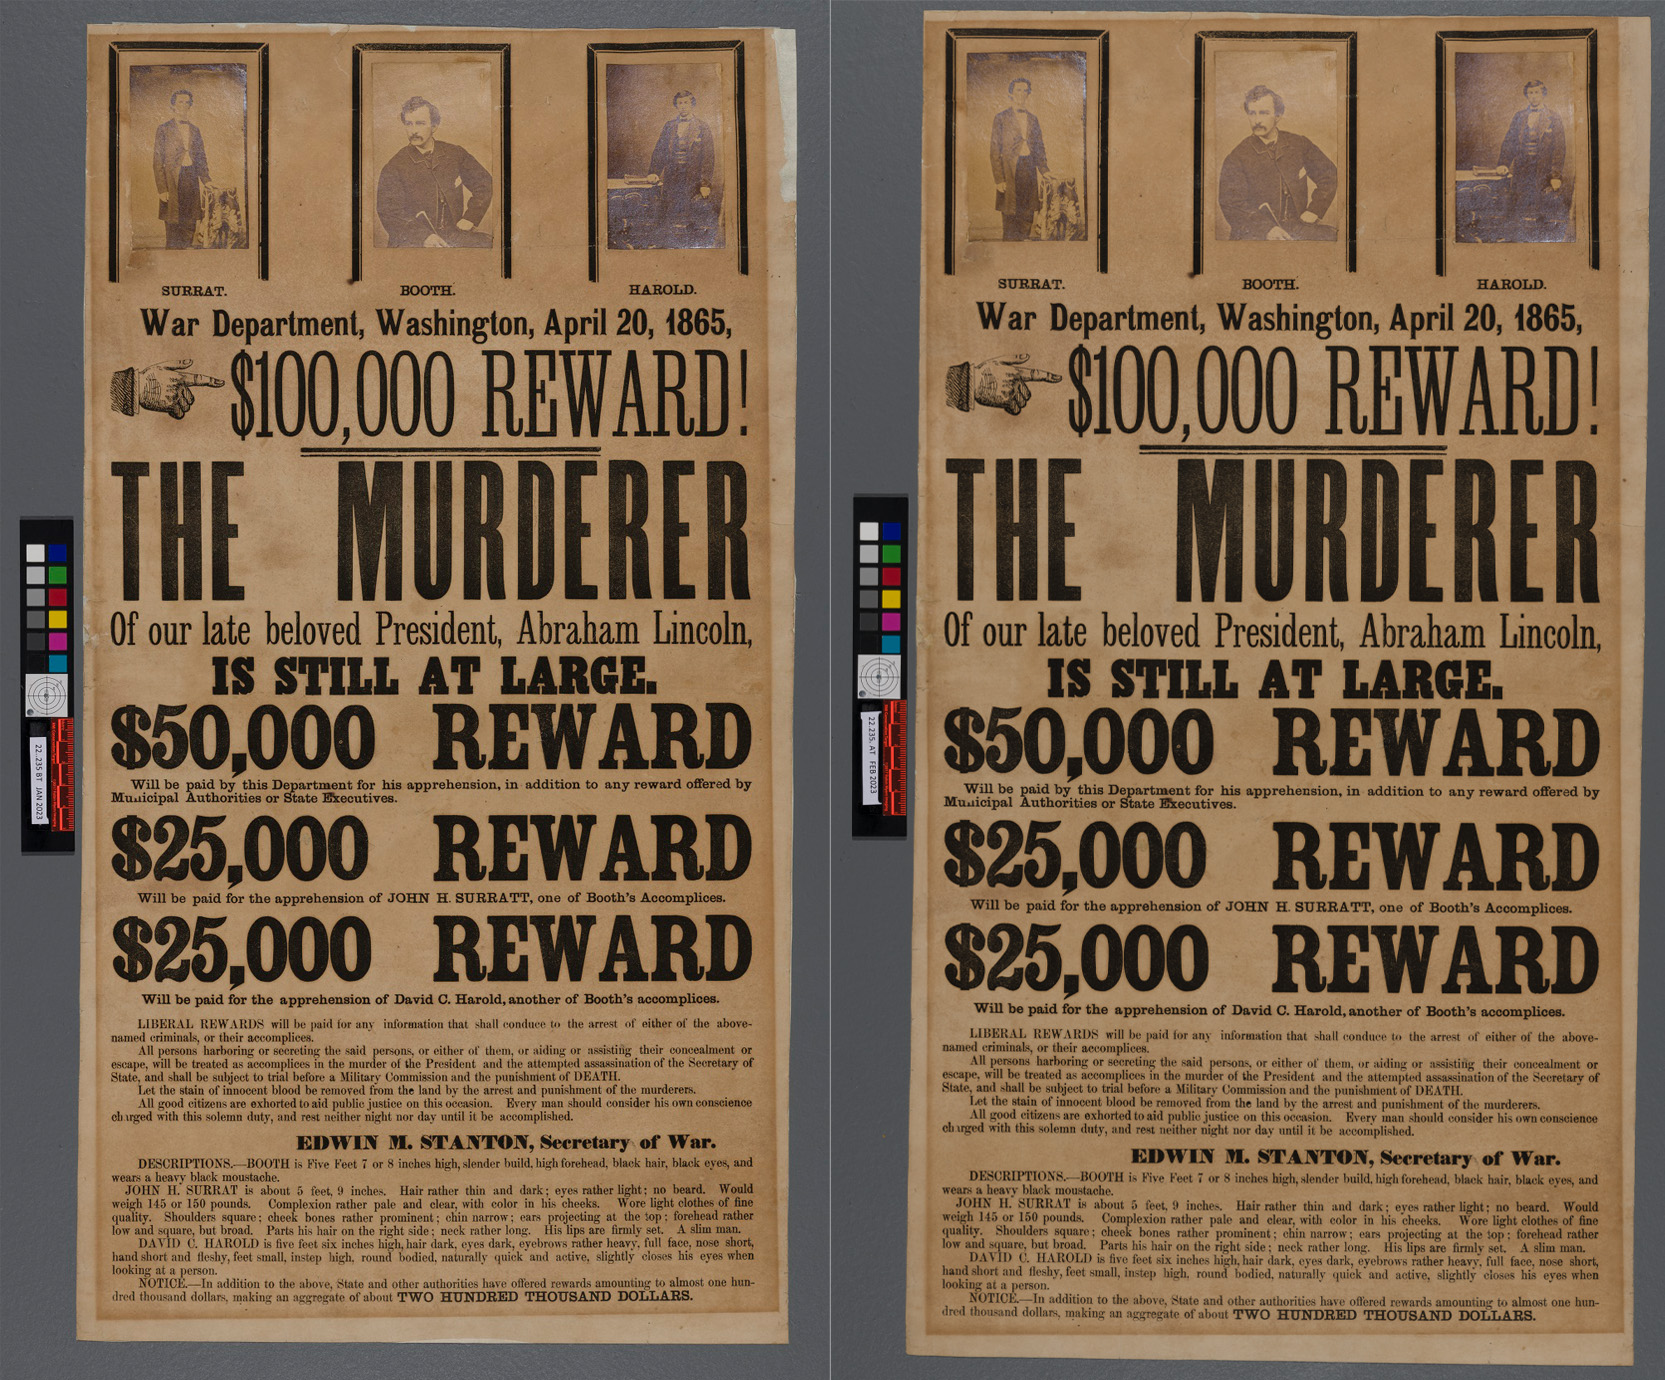 before- and after-treatment reference photographs of an original John Wilkes Booth wanted poster